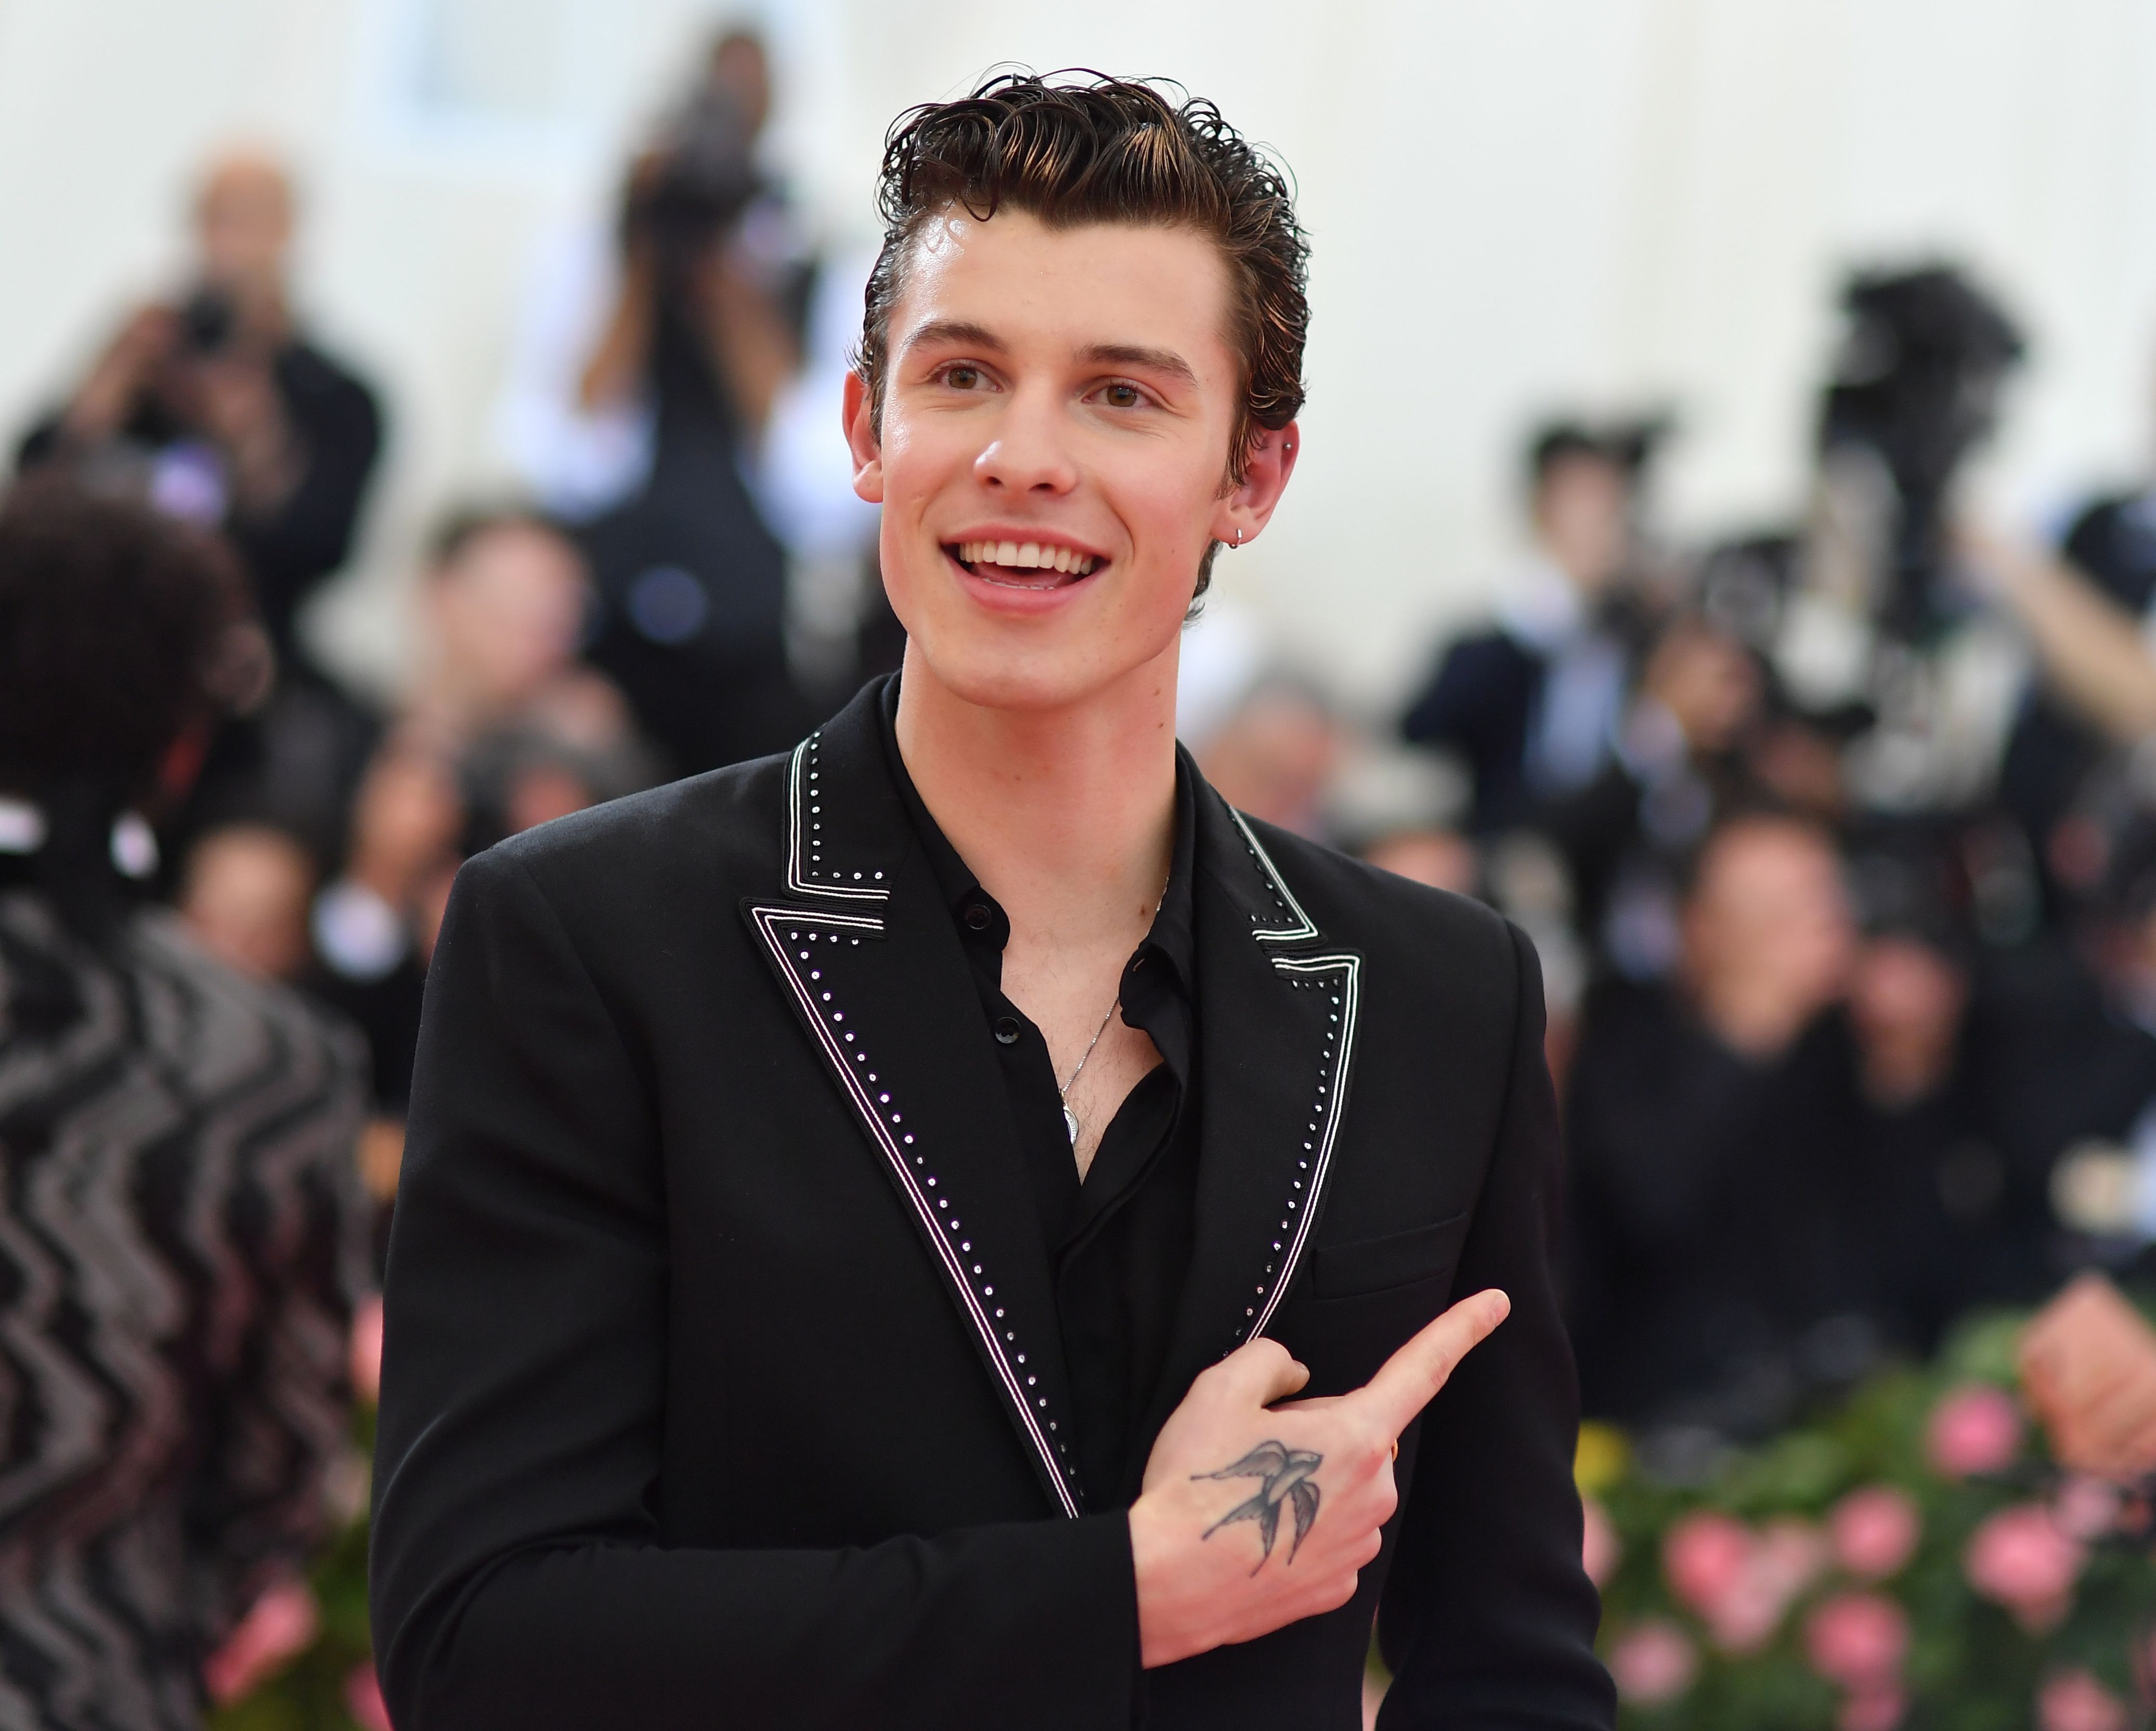 Shawn Mendes Hairstyles Hair Cuts and Colors